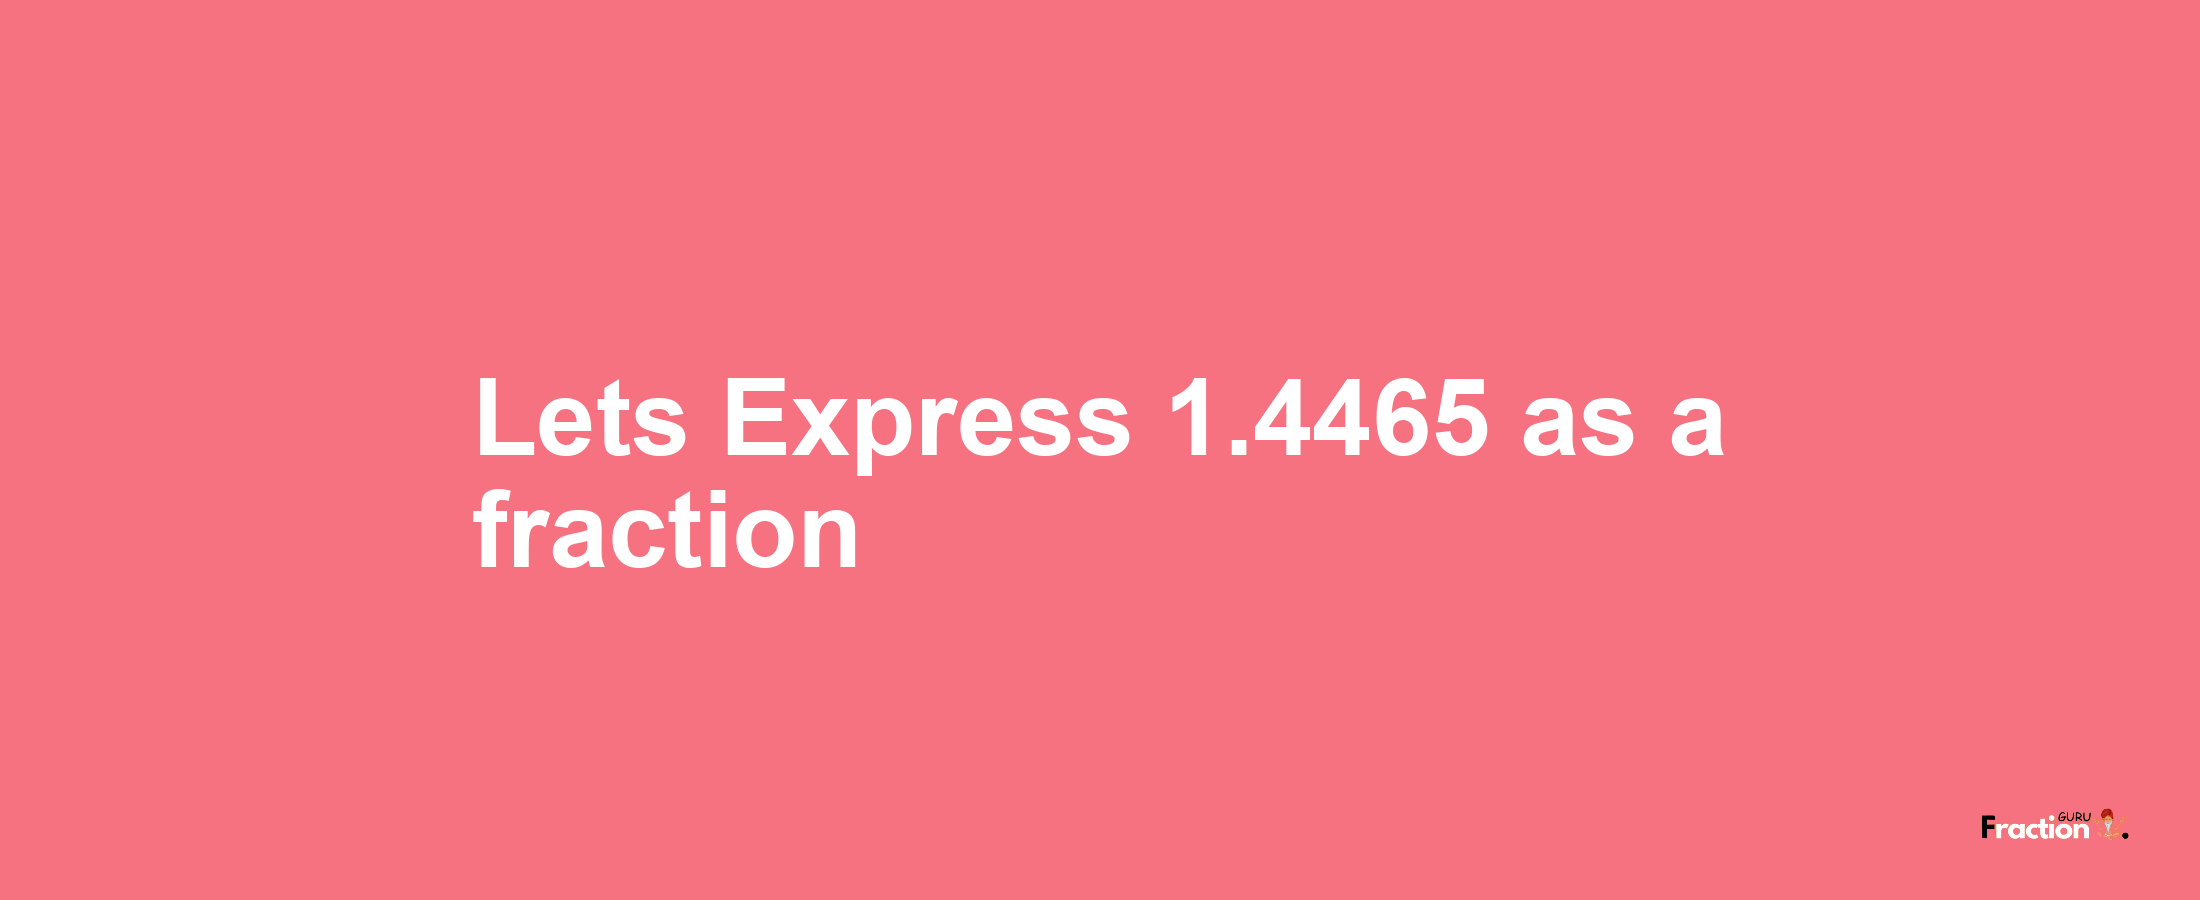 Lets Express 1.4465 as afraction